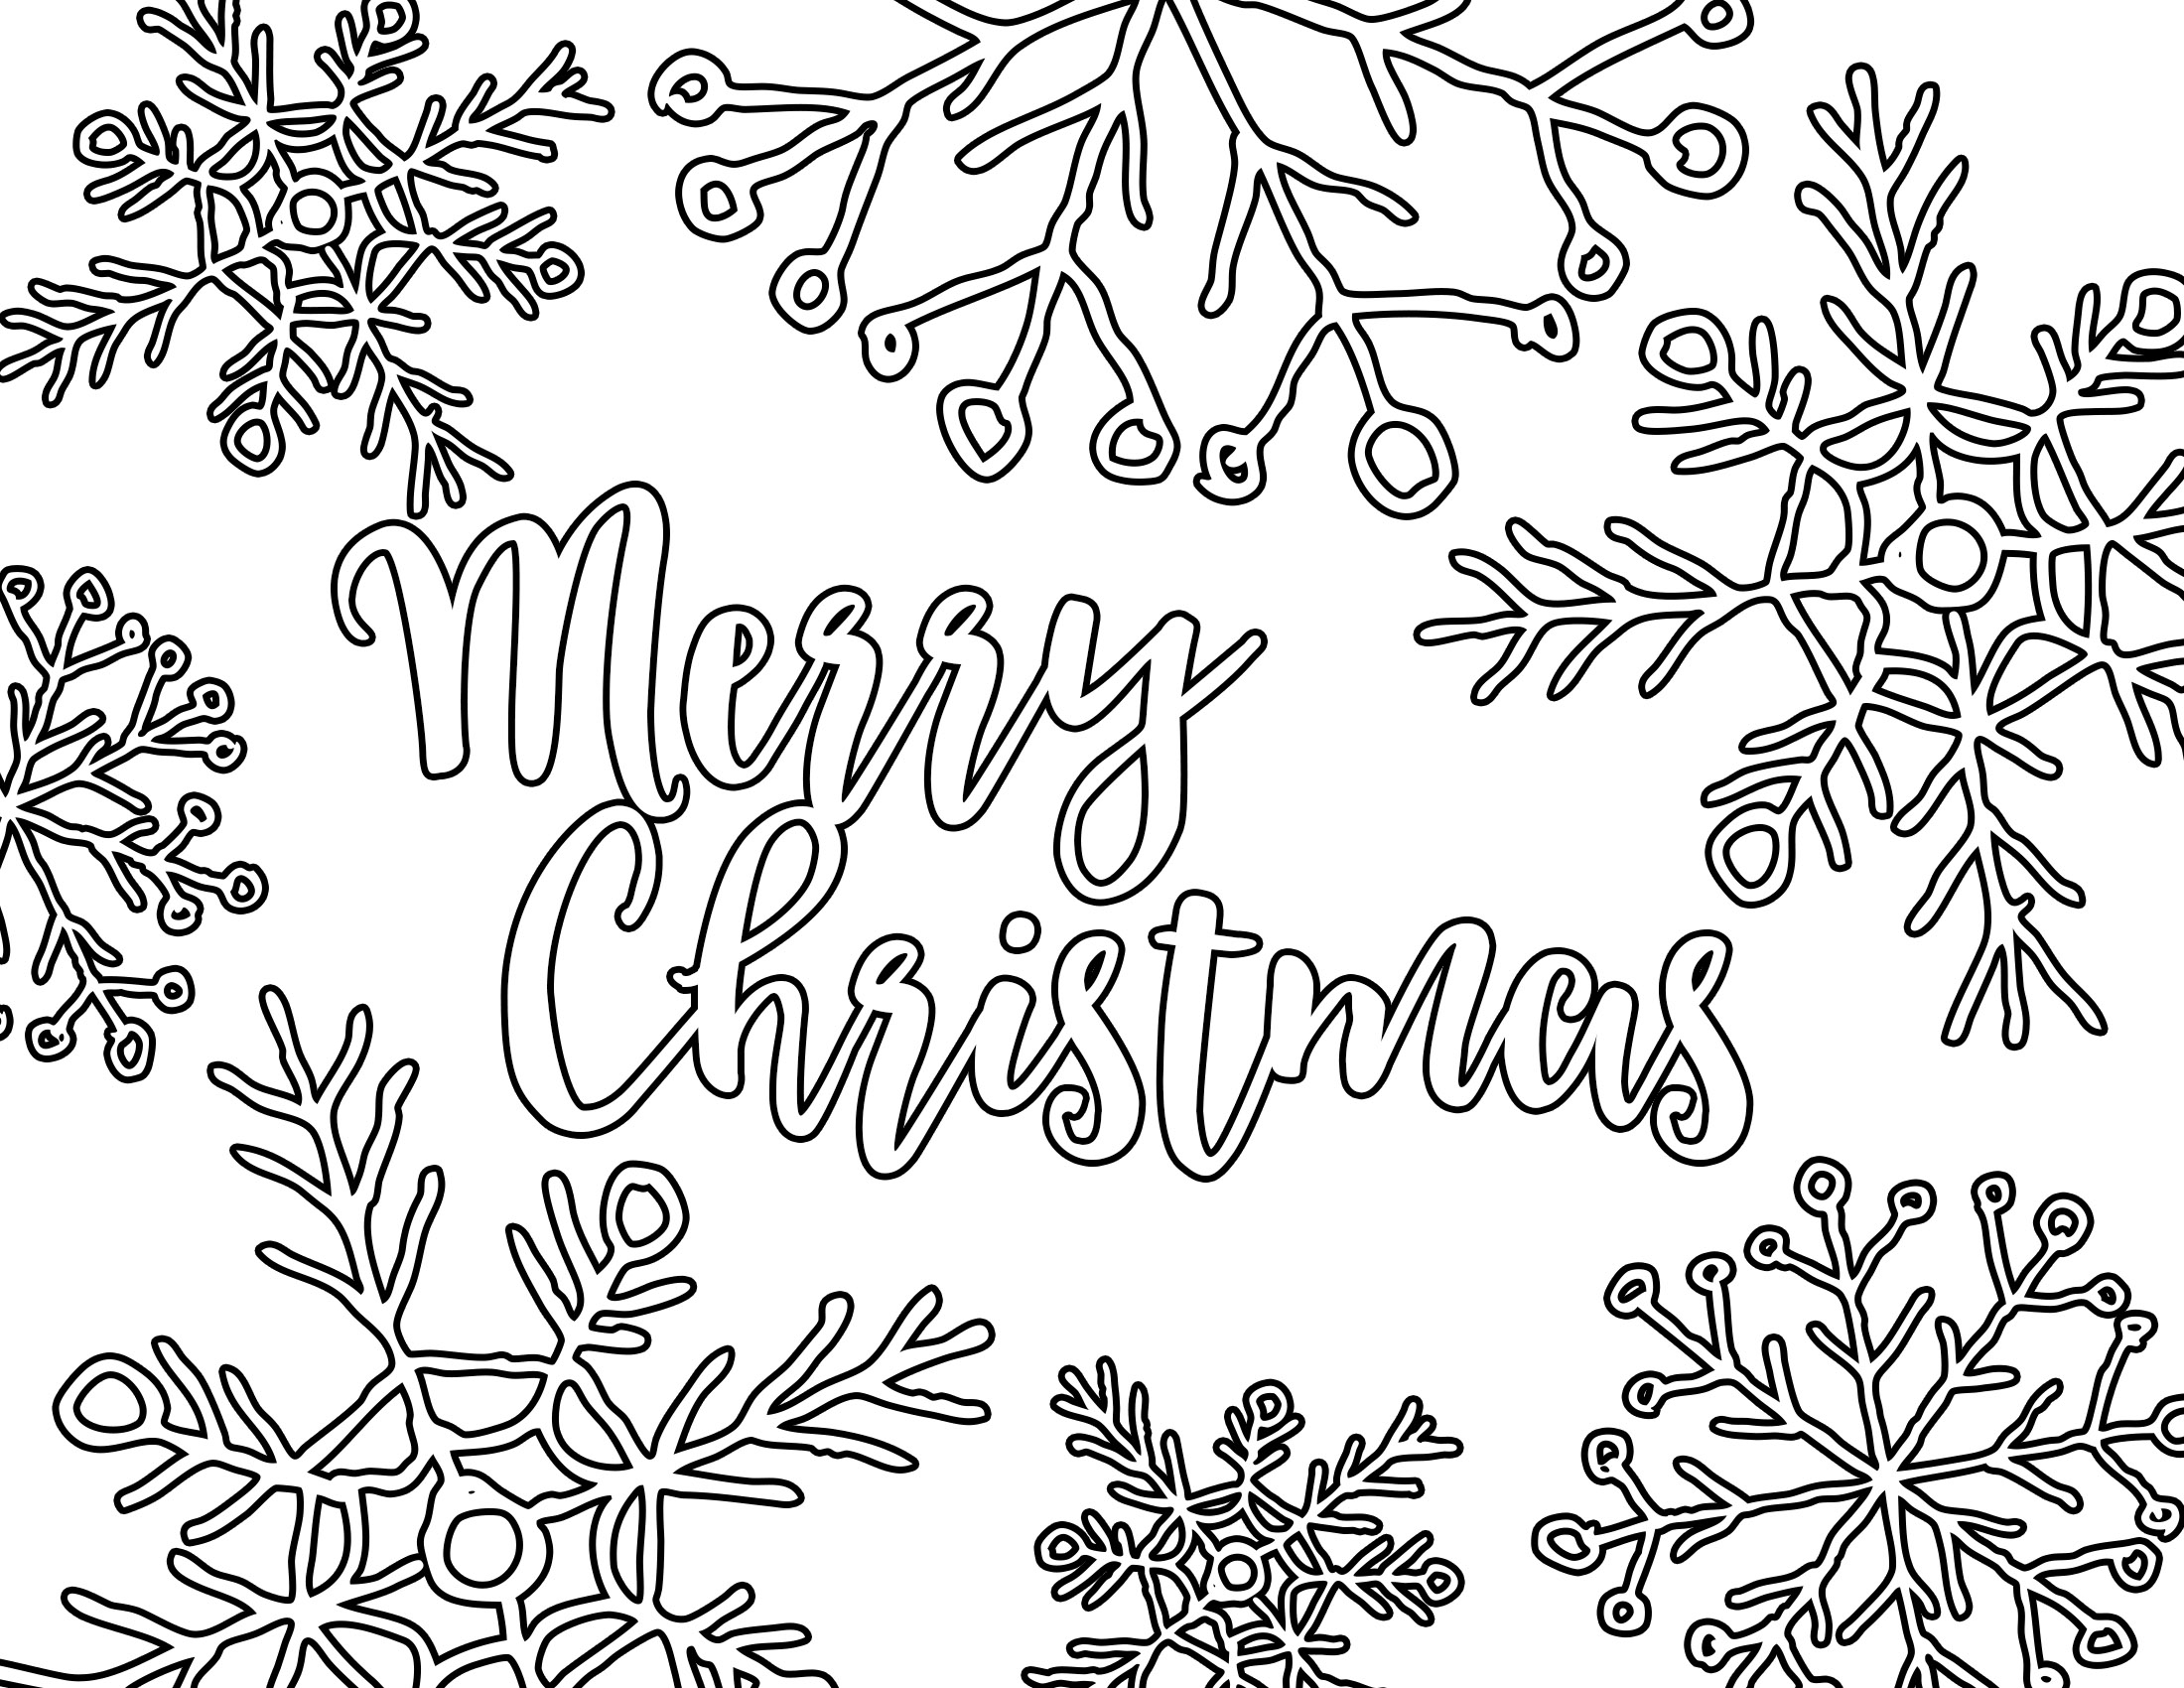 Free Printable Adult Coloring Page Christmas Placemat Our Handcrafted Life